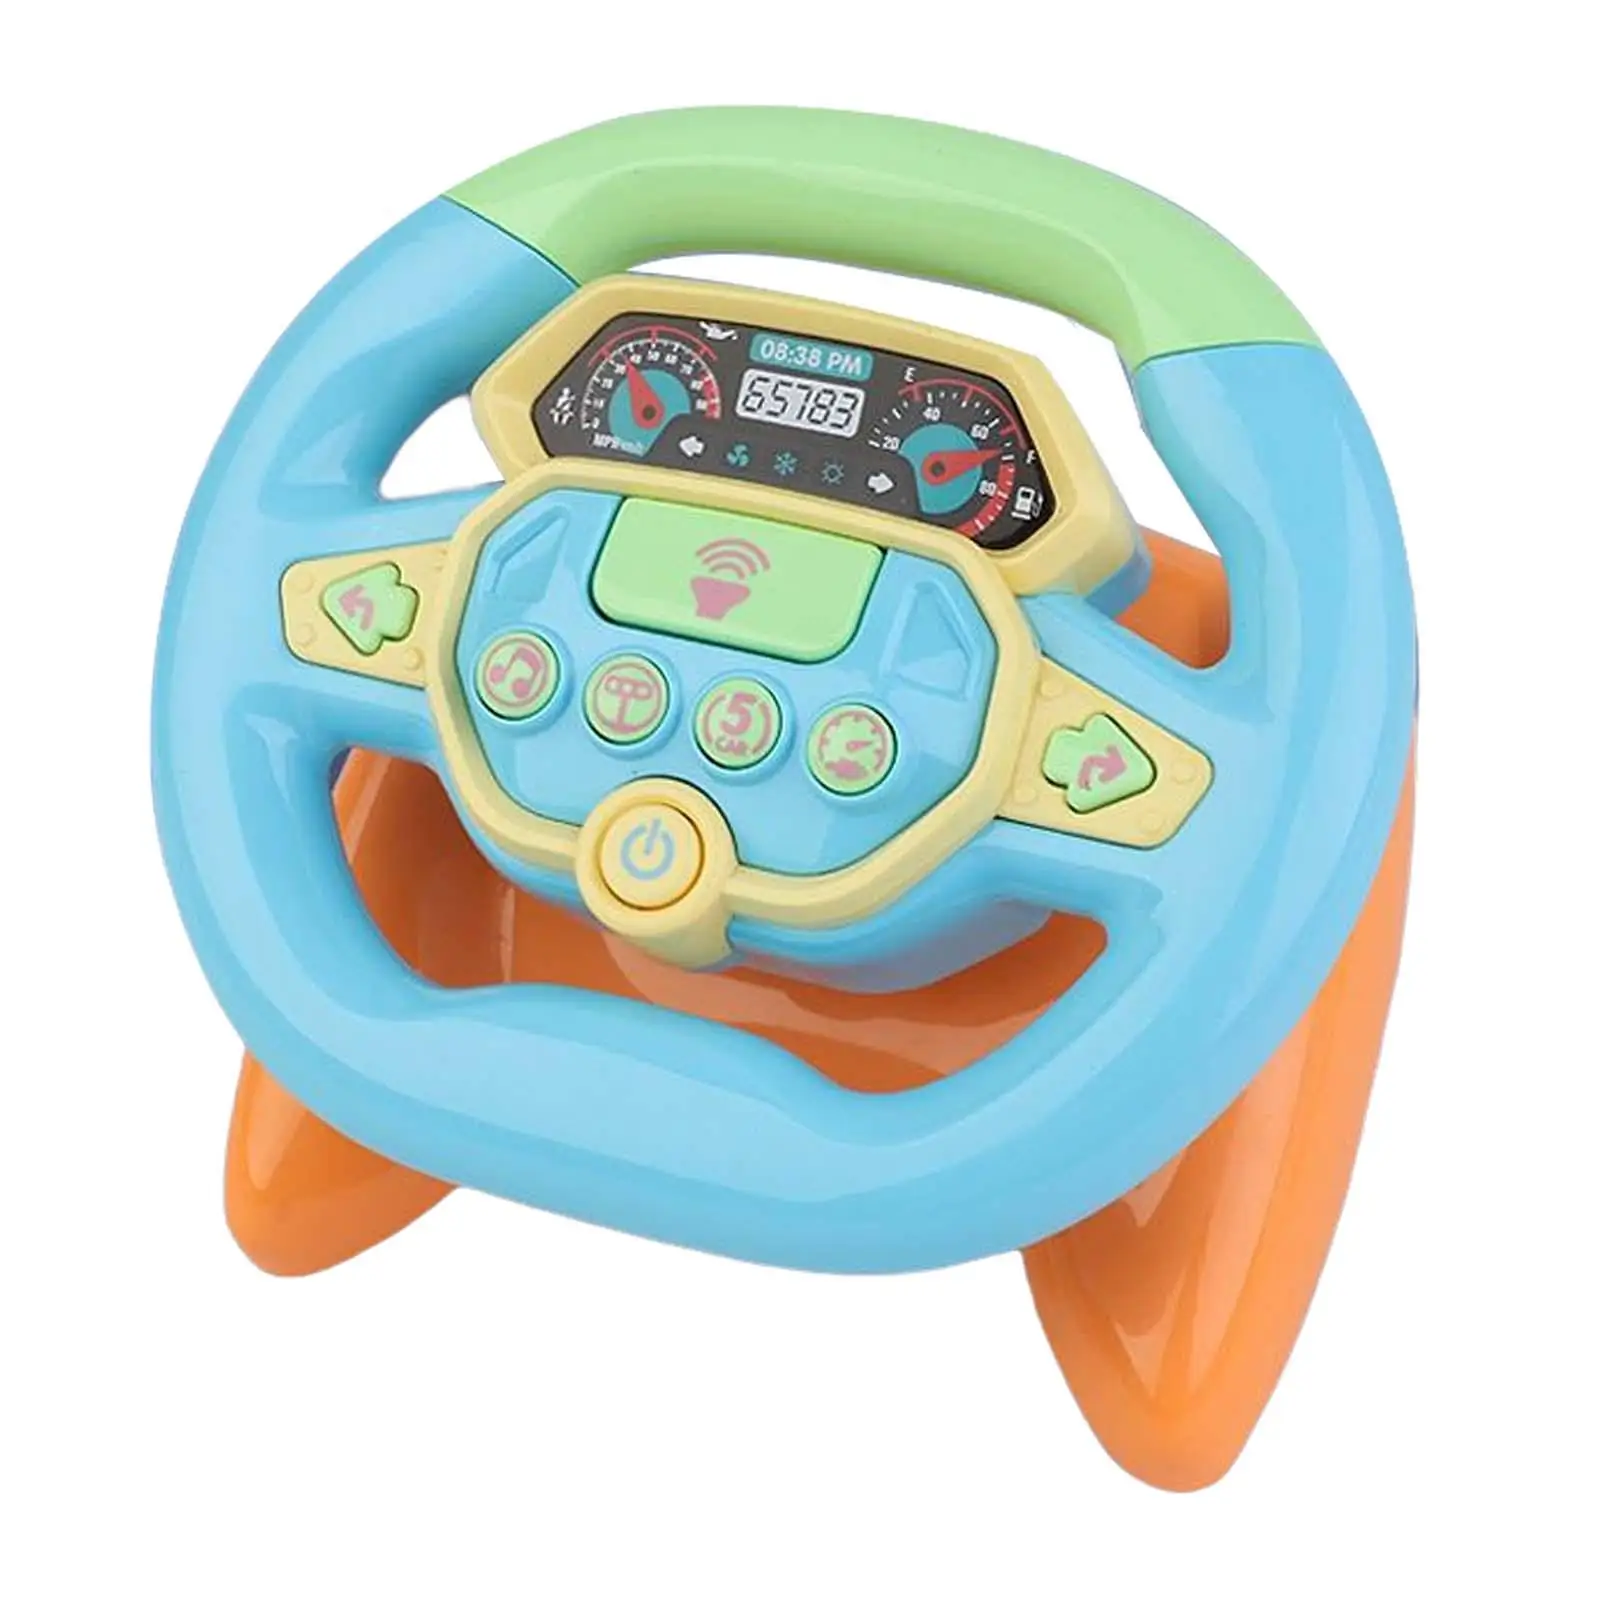 90 Degree Rotation Driving Steering Wheel Toy Educational Learning Toy Pretend